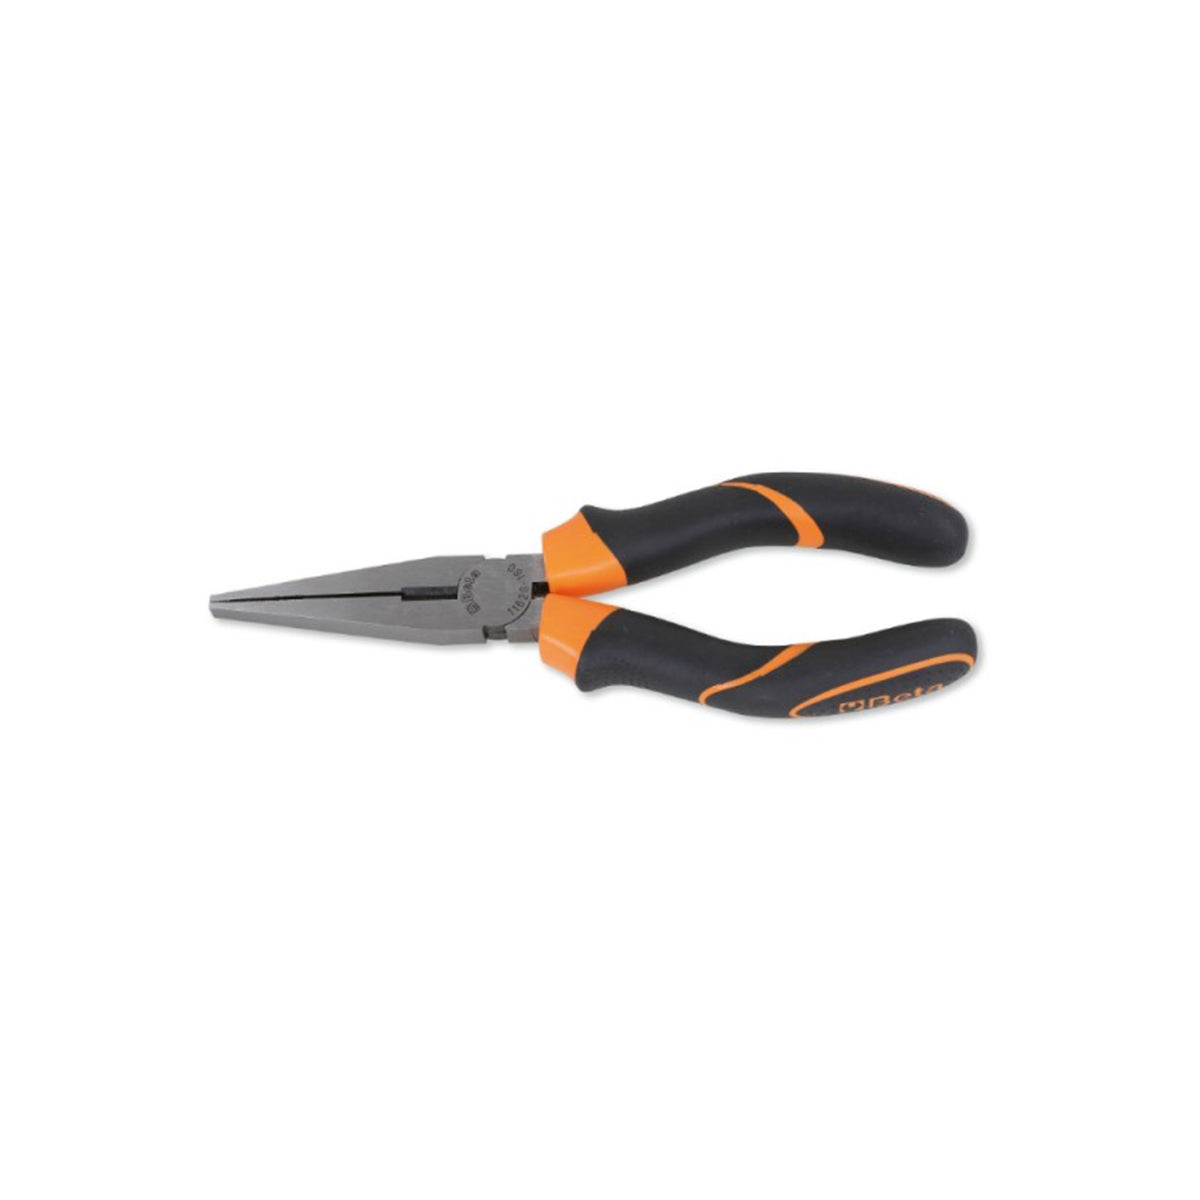 Extra-long flat knurled nose pliers, bi-material handles, industrial finish Beta